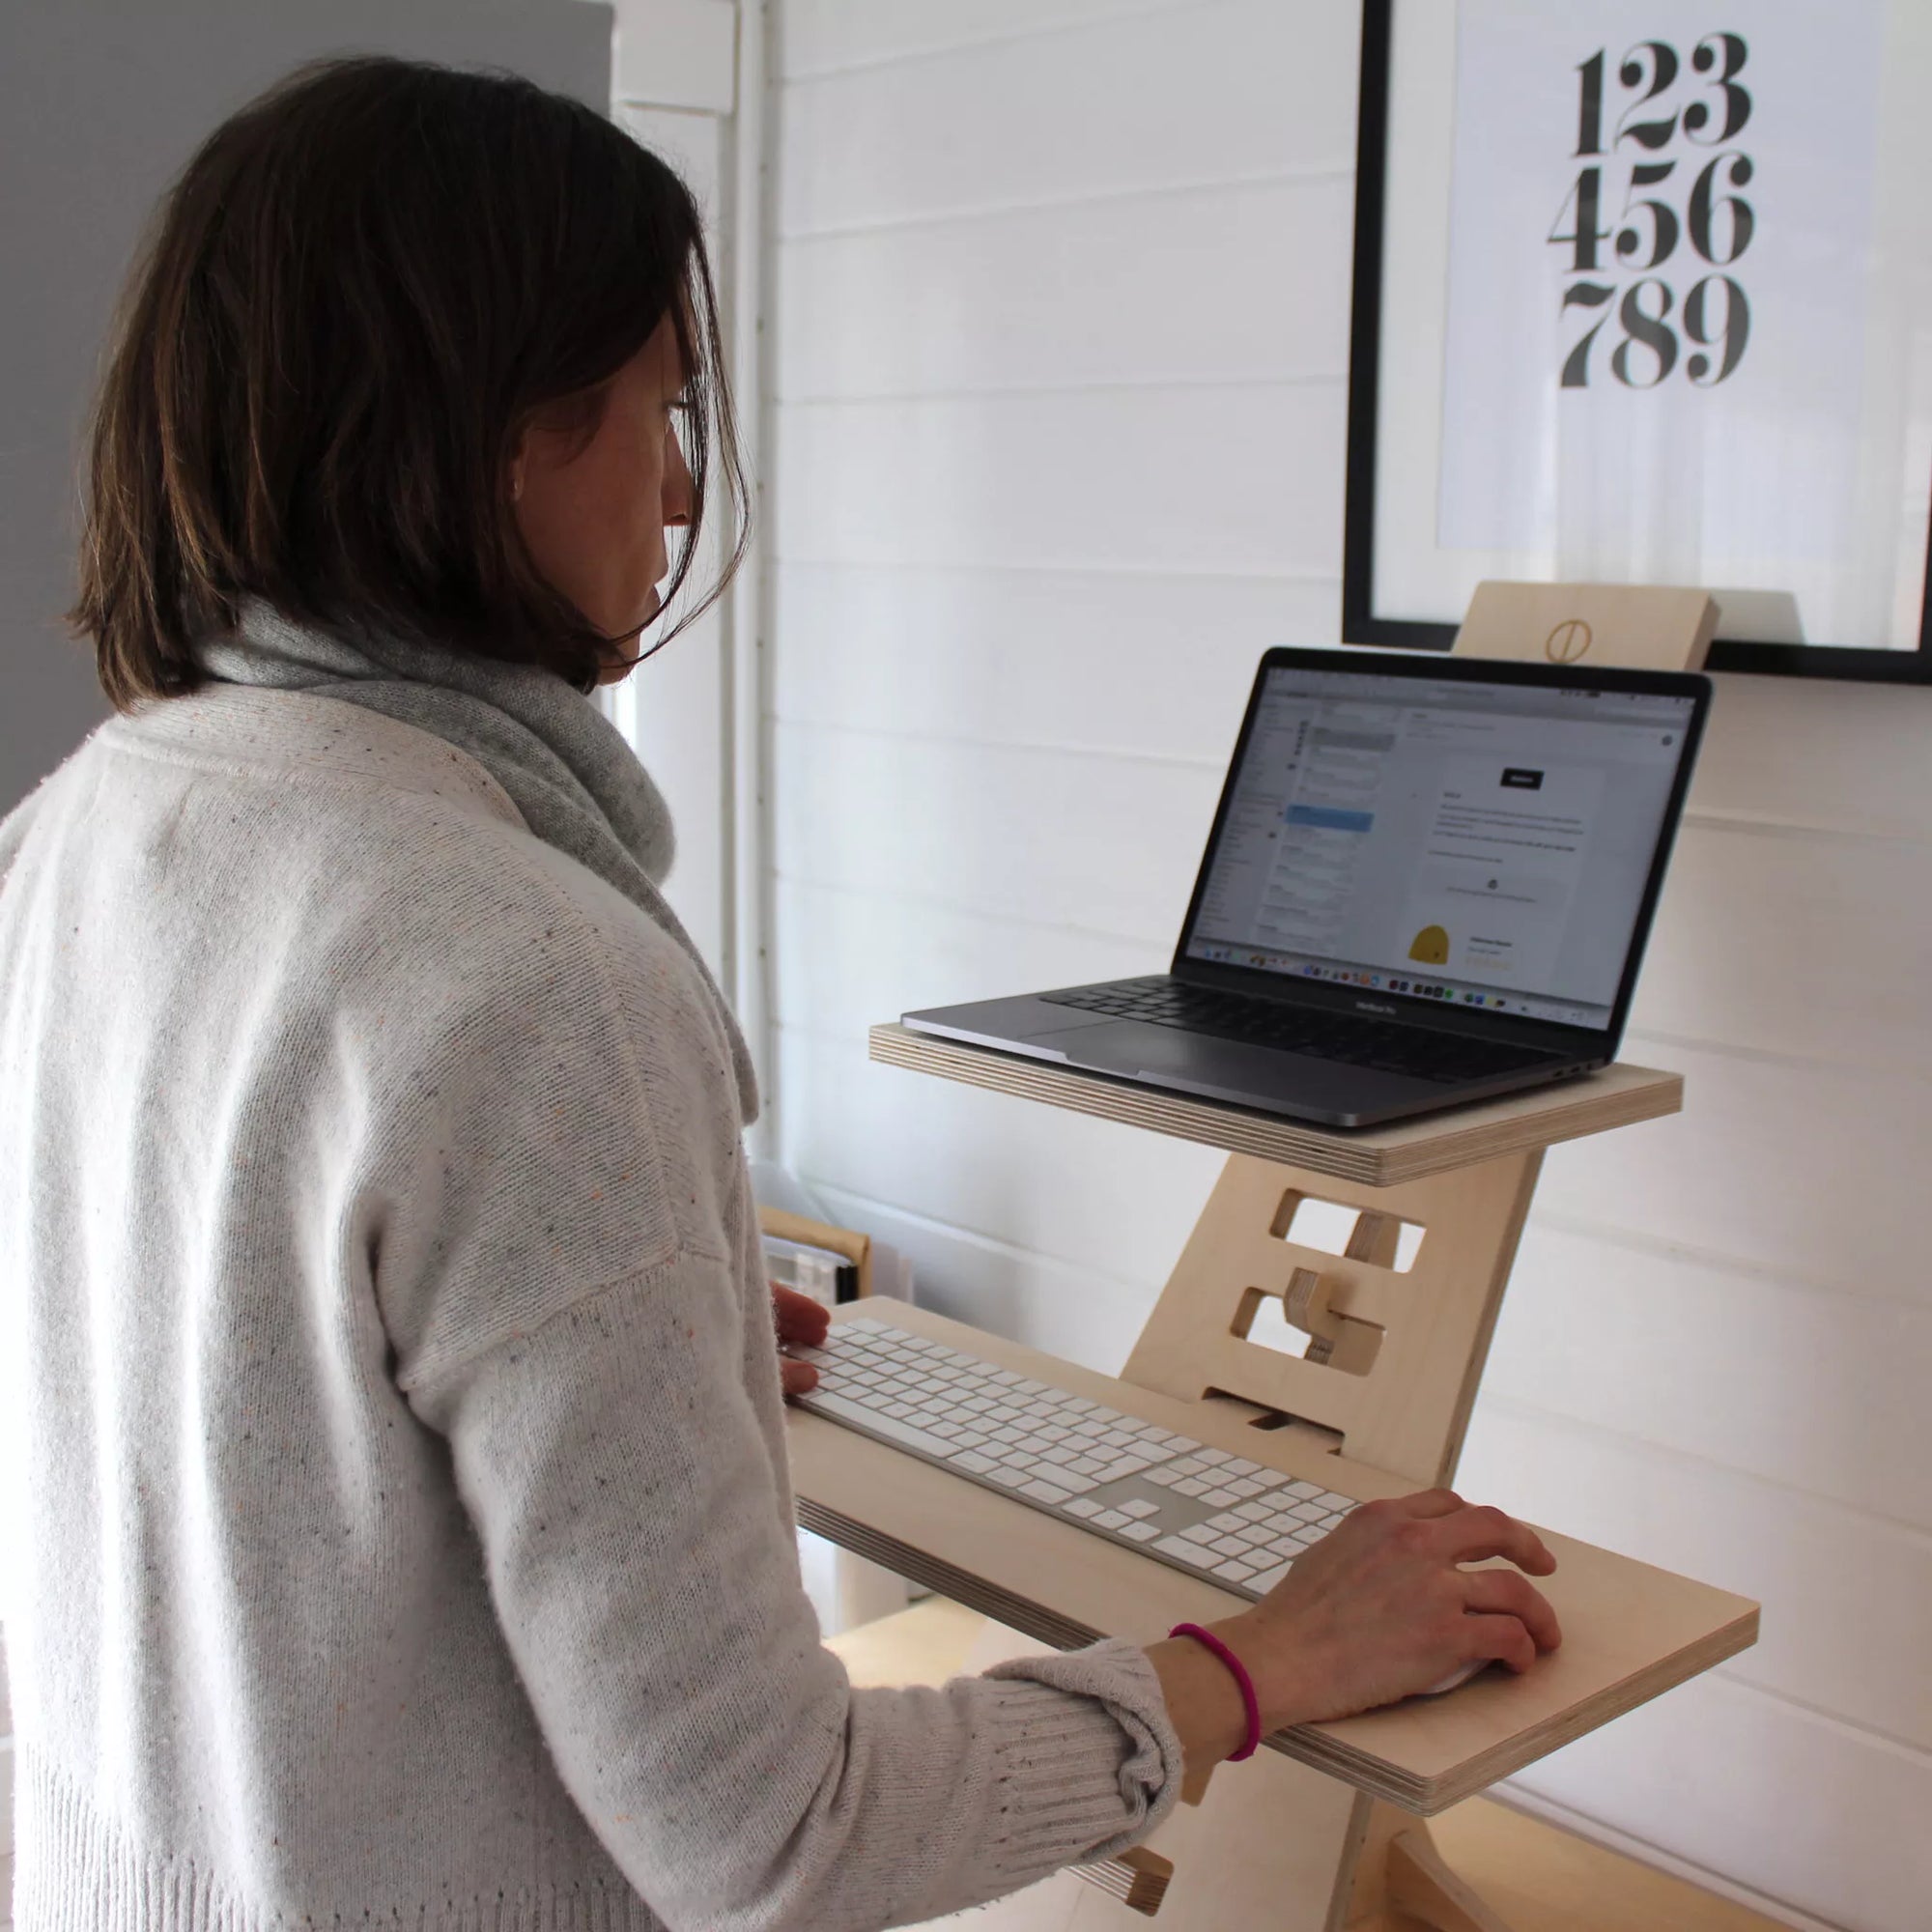 What You Need to Know Before Buying a Standup Desk